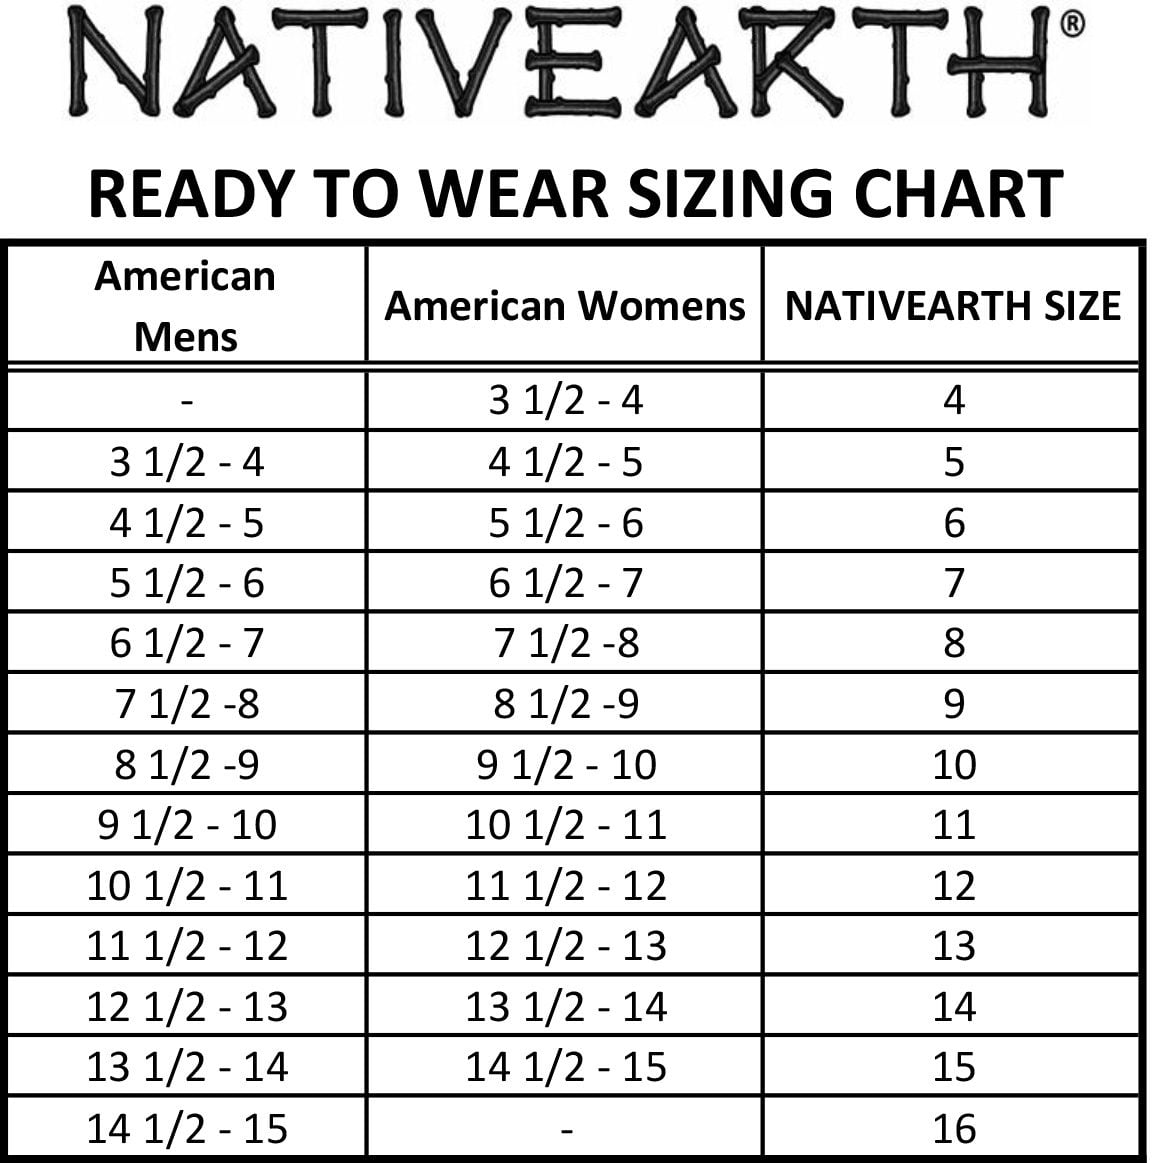 Nativearth Ready to Wear sizing chart